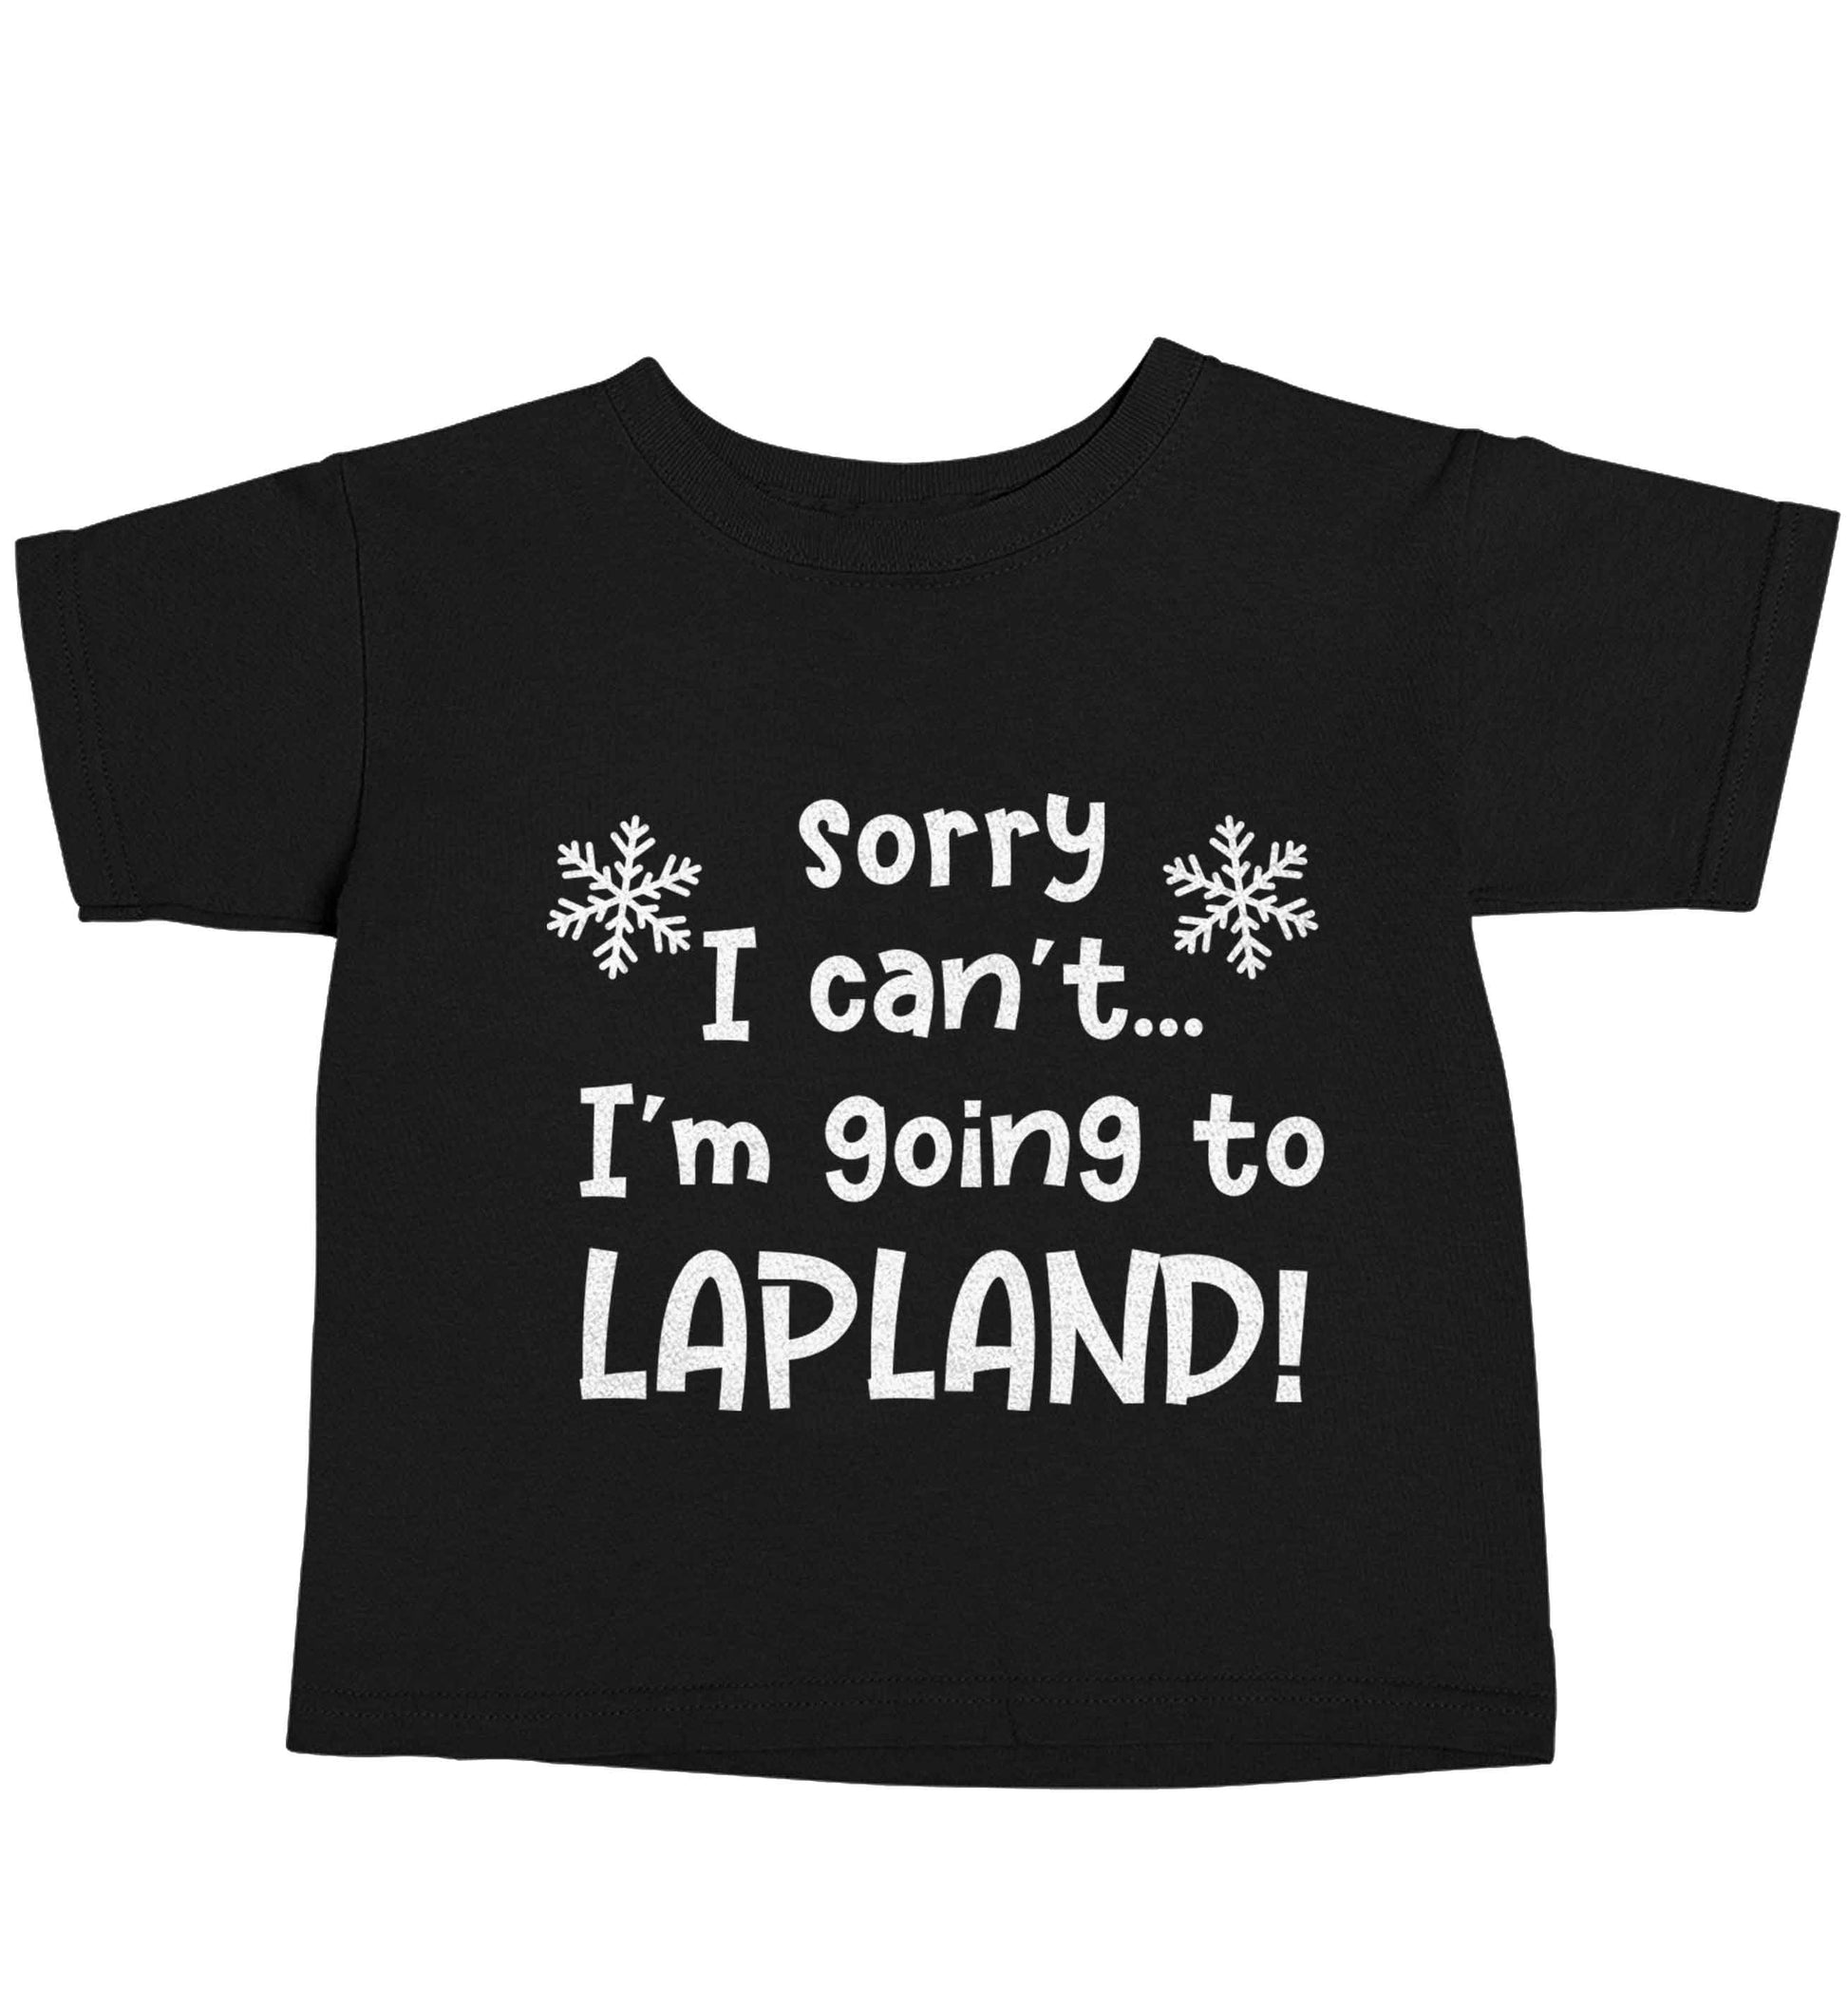 Sorry I can't I'm going to Lapland Black baby toddler Tshirt 2 years